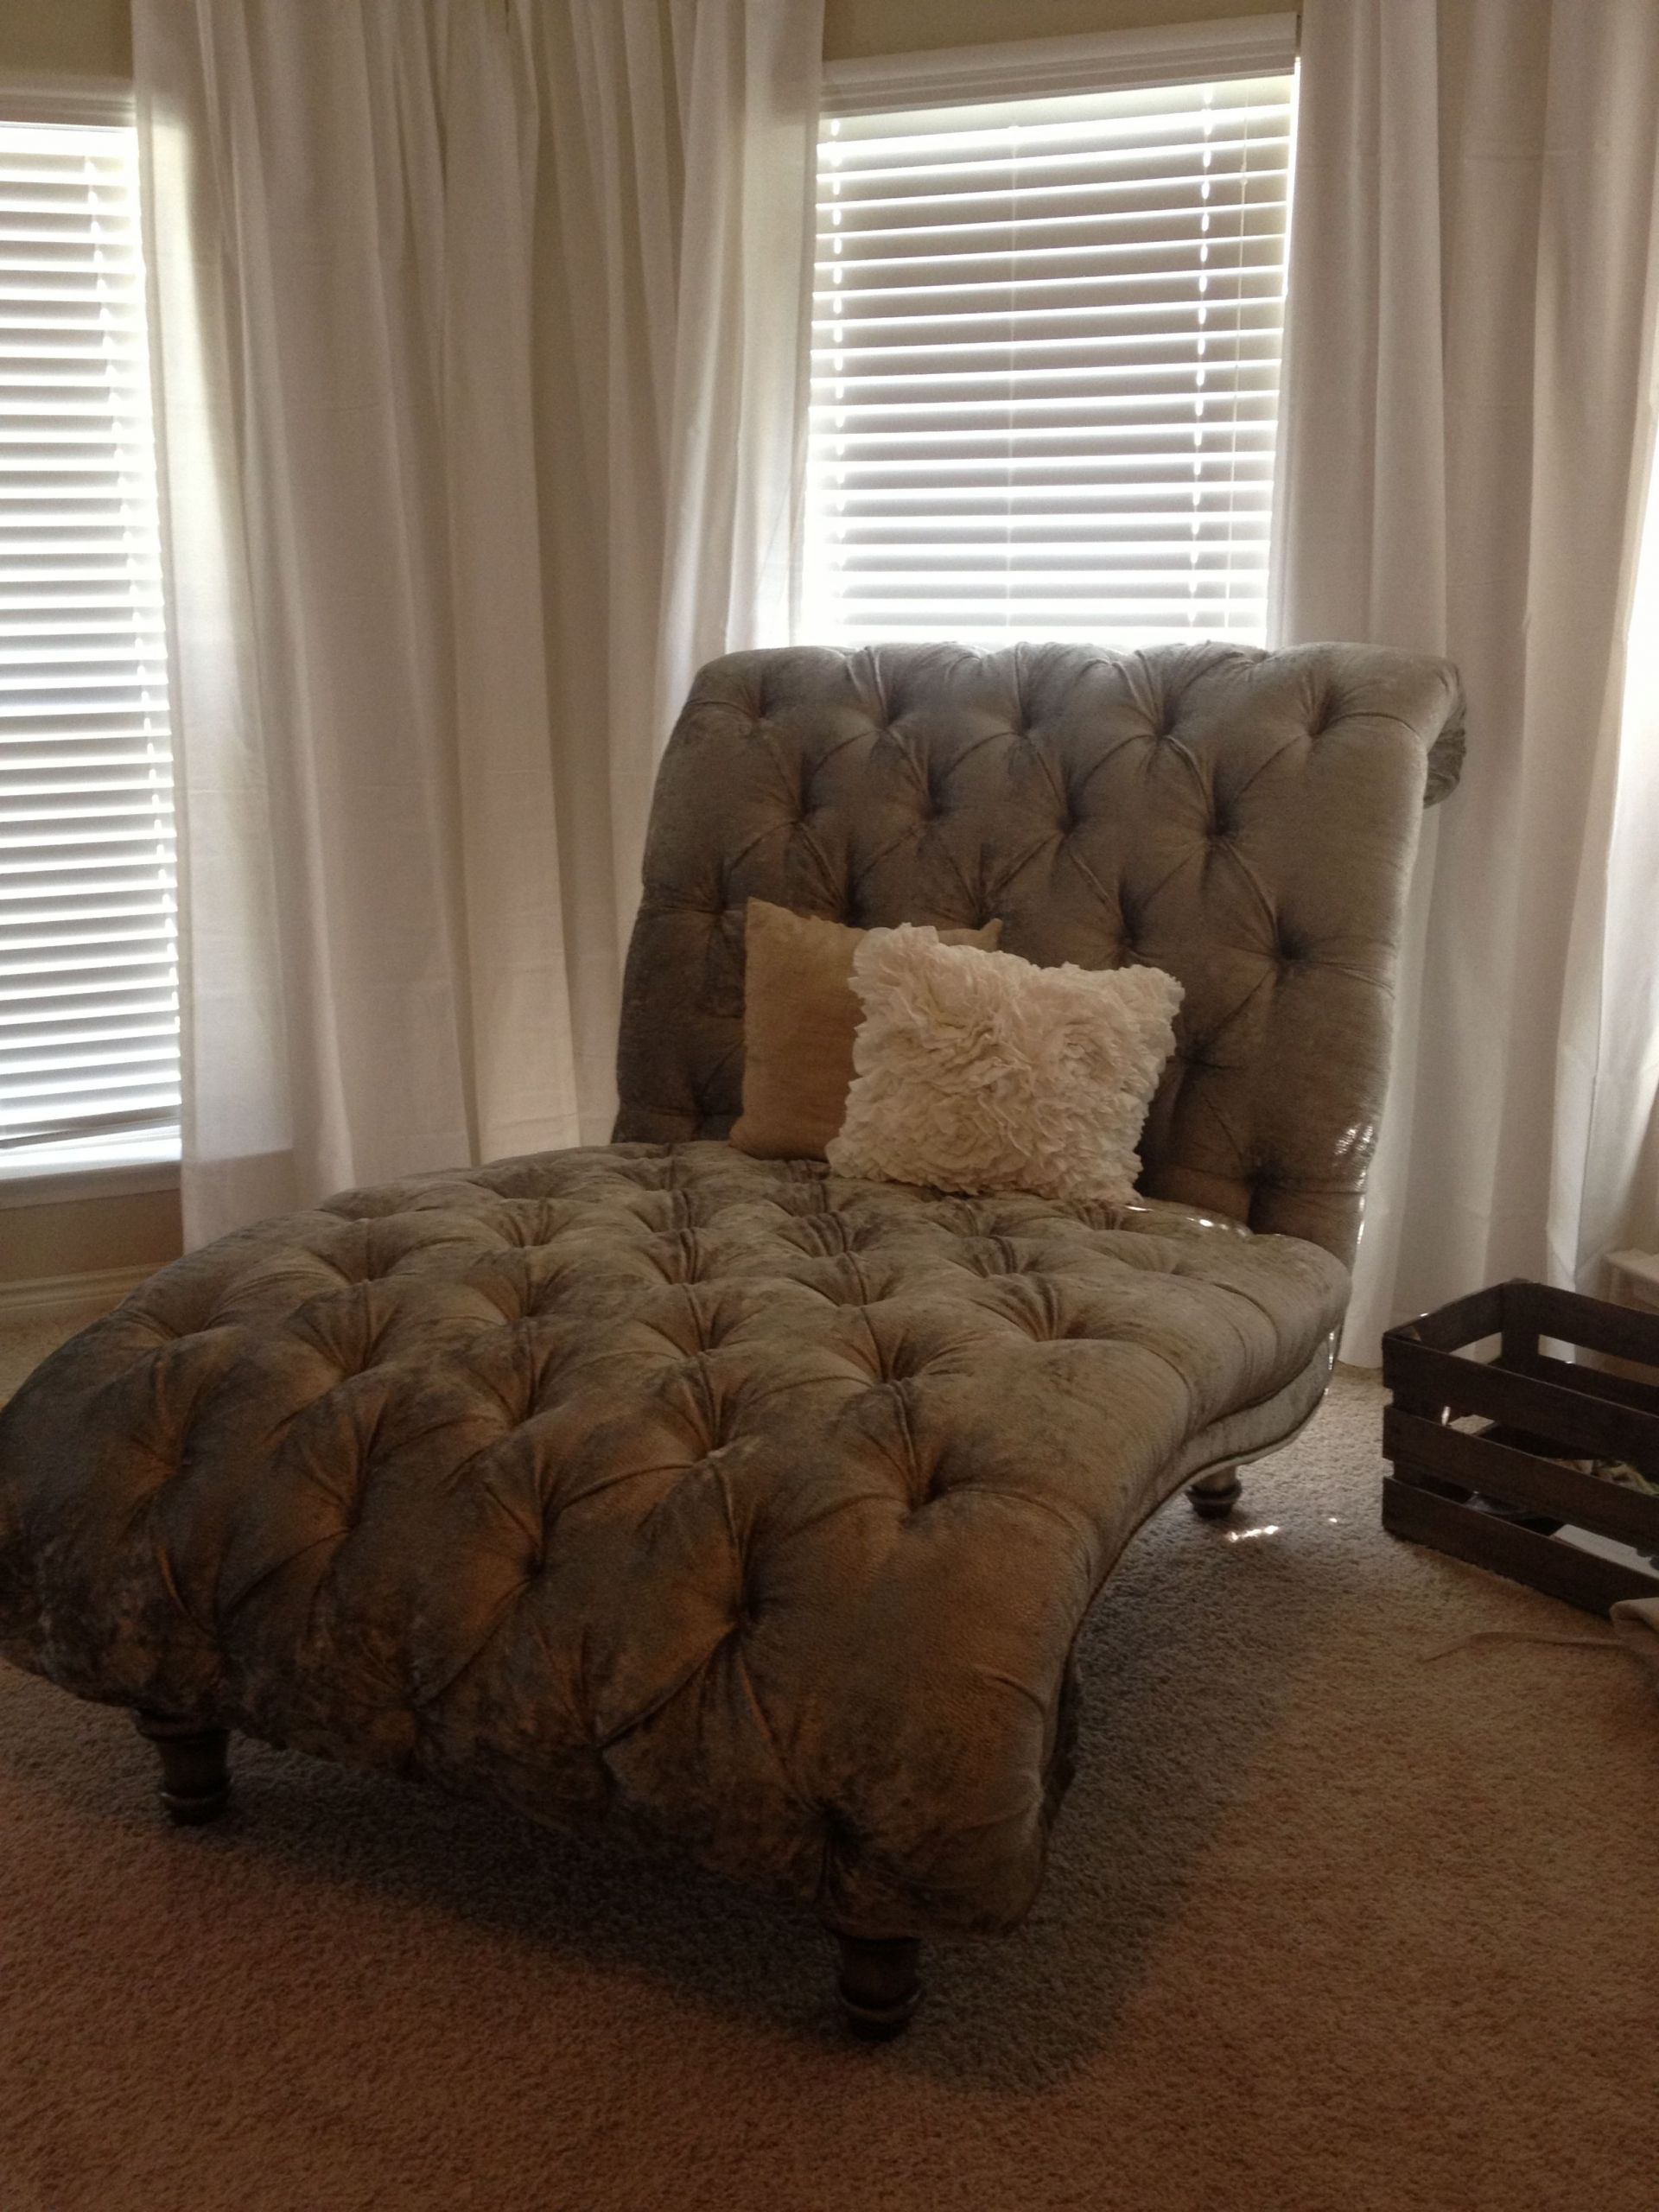 Small Lounge Chair For Bedroom
 Tufted double chaise lounge chair in our master bedroom